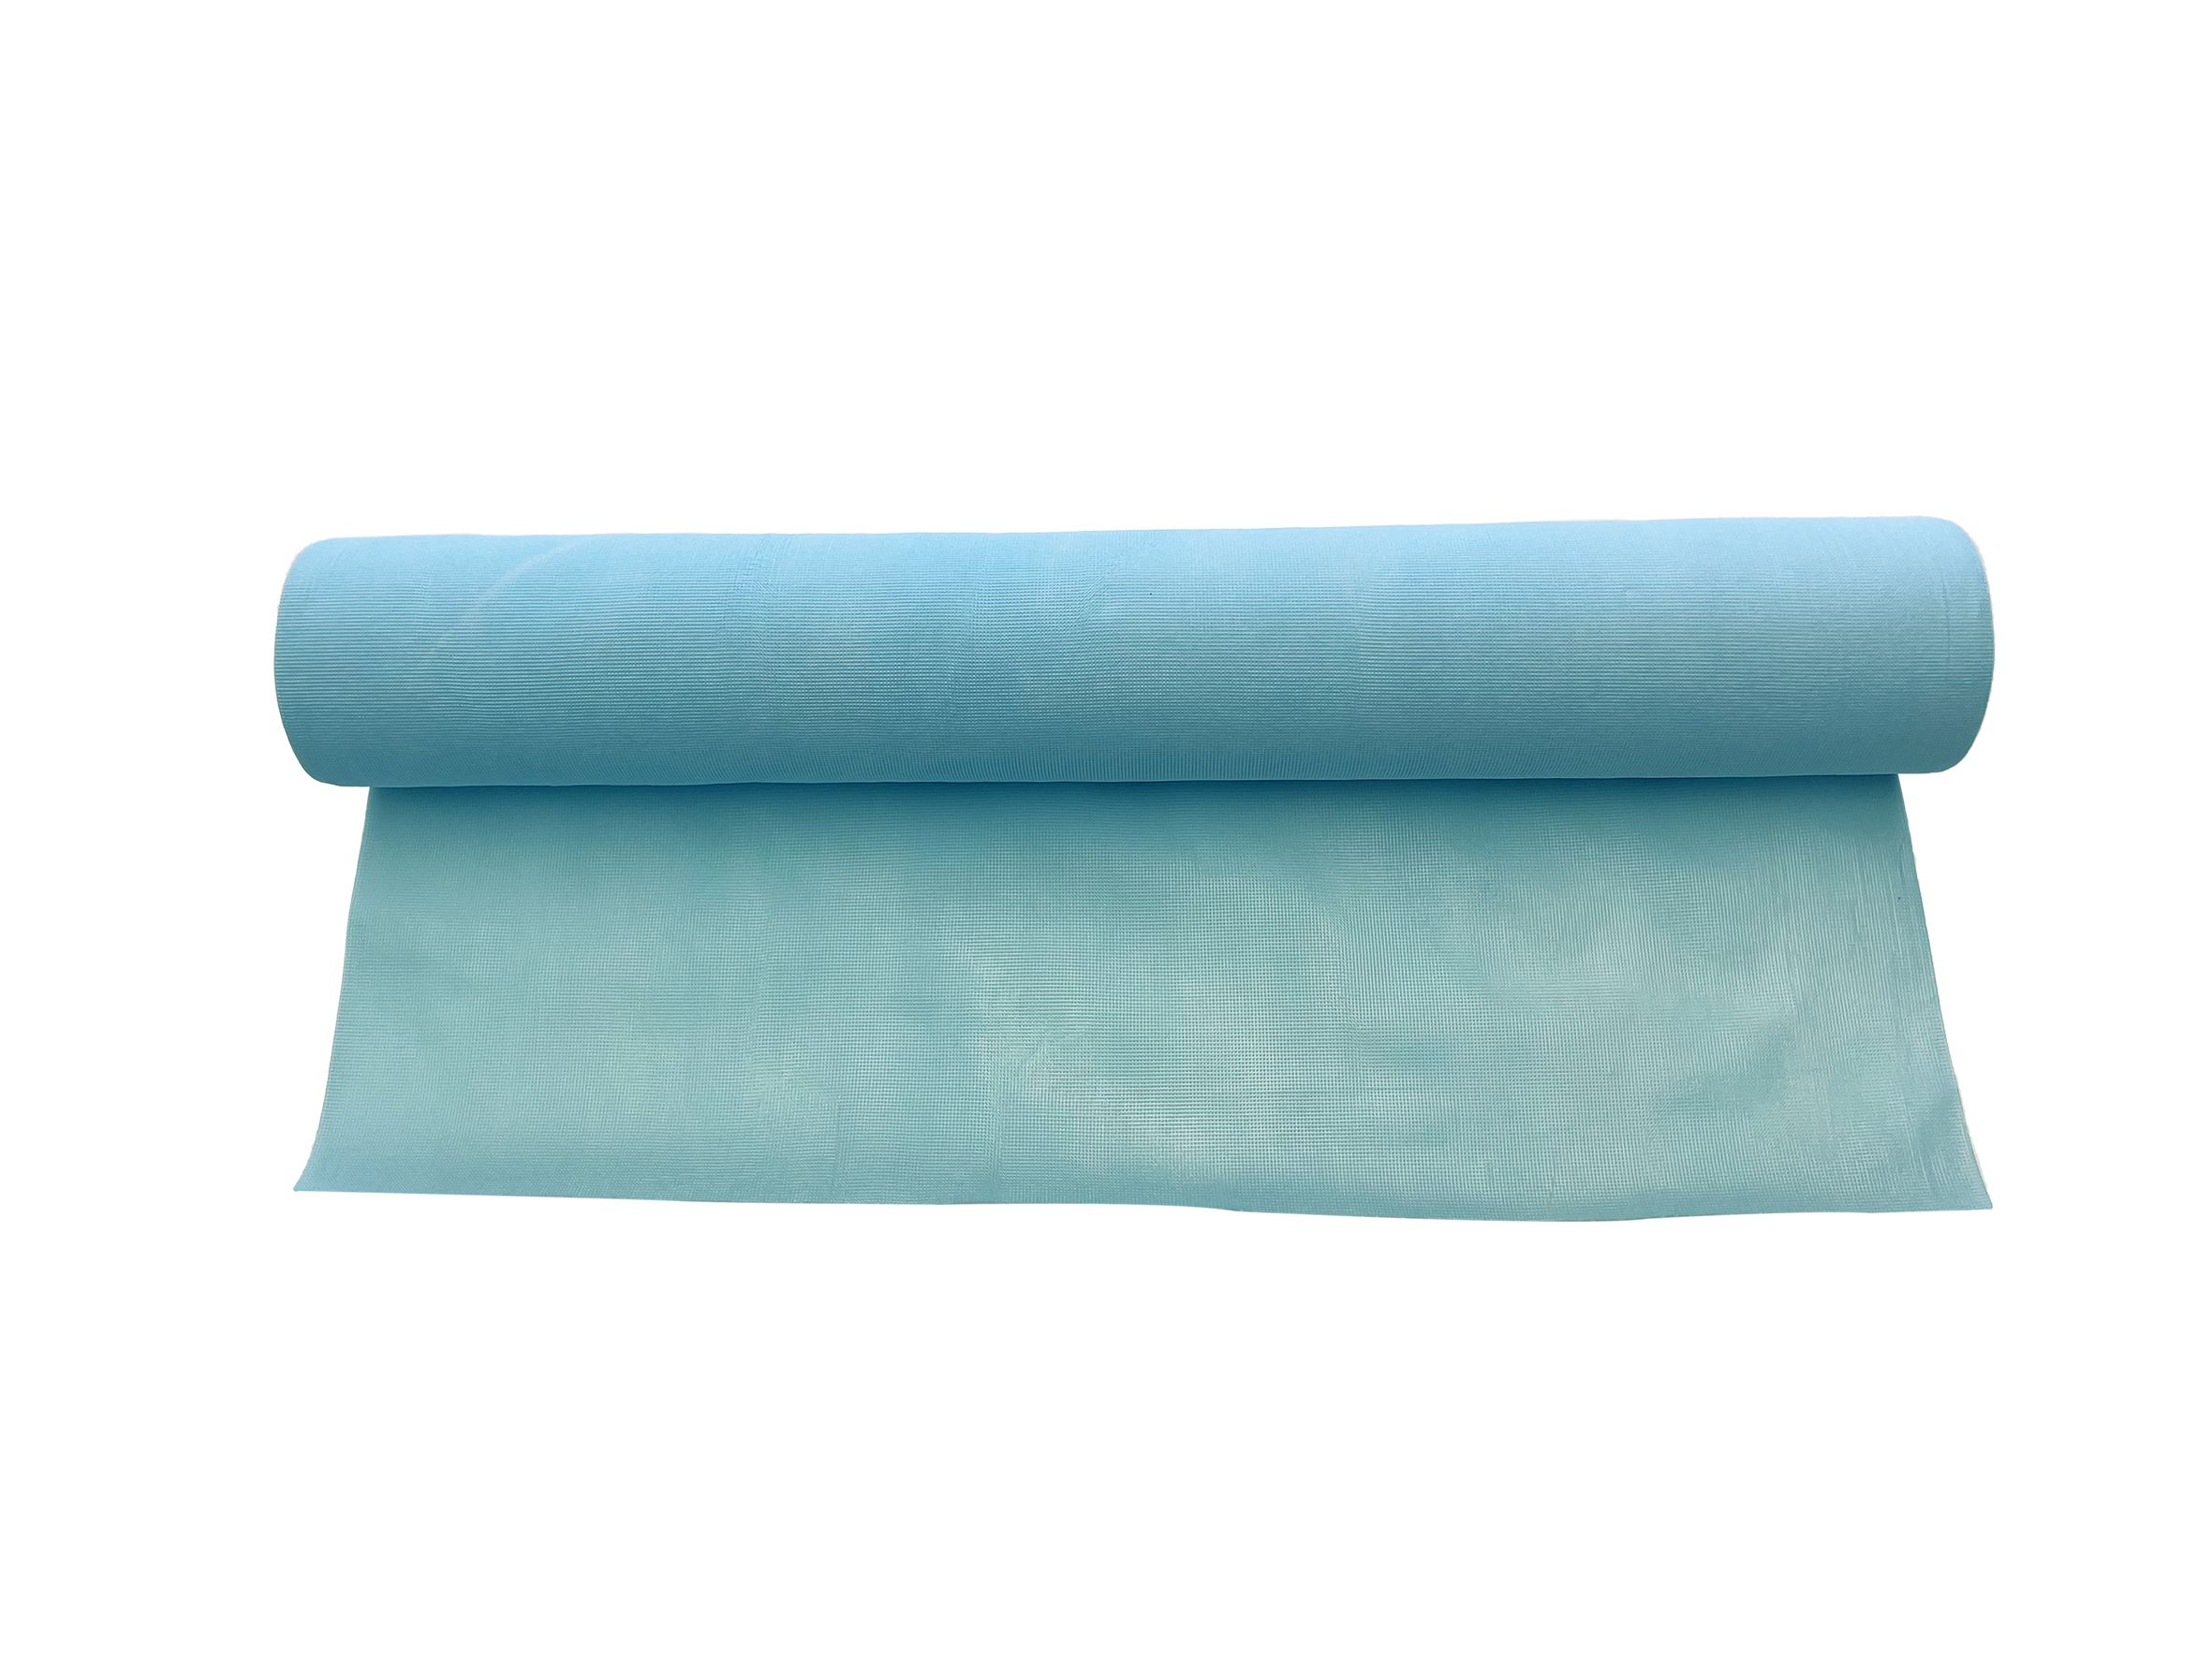 Introducing JPS Medical Couch Paper Roll: Redefining Hygiene Standards in Medical Settings